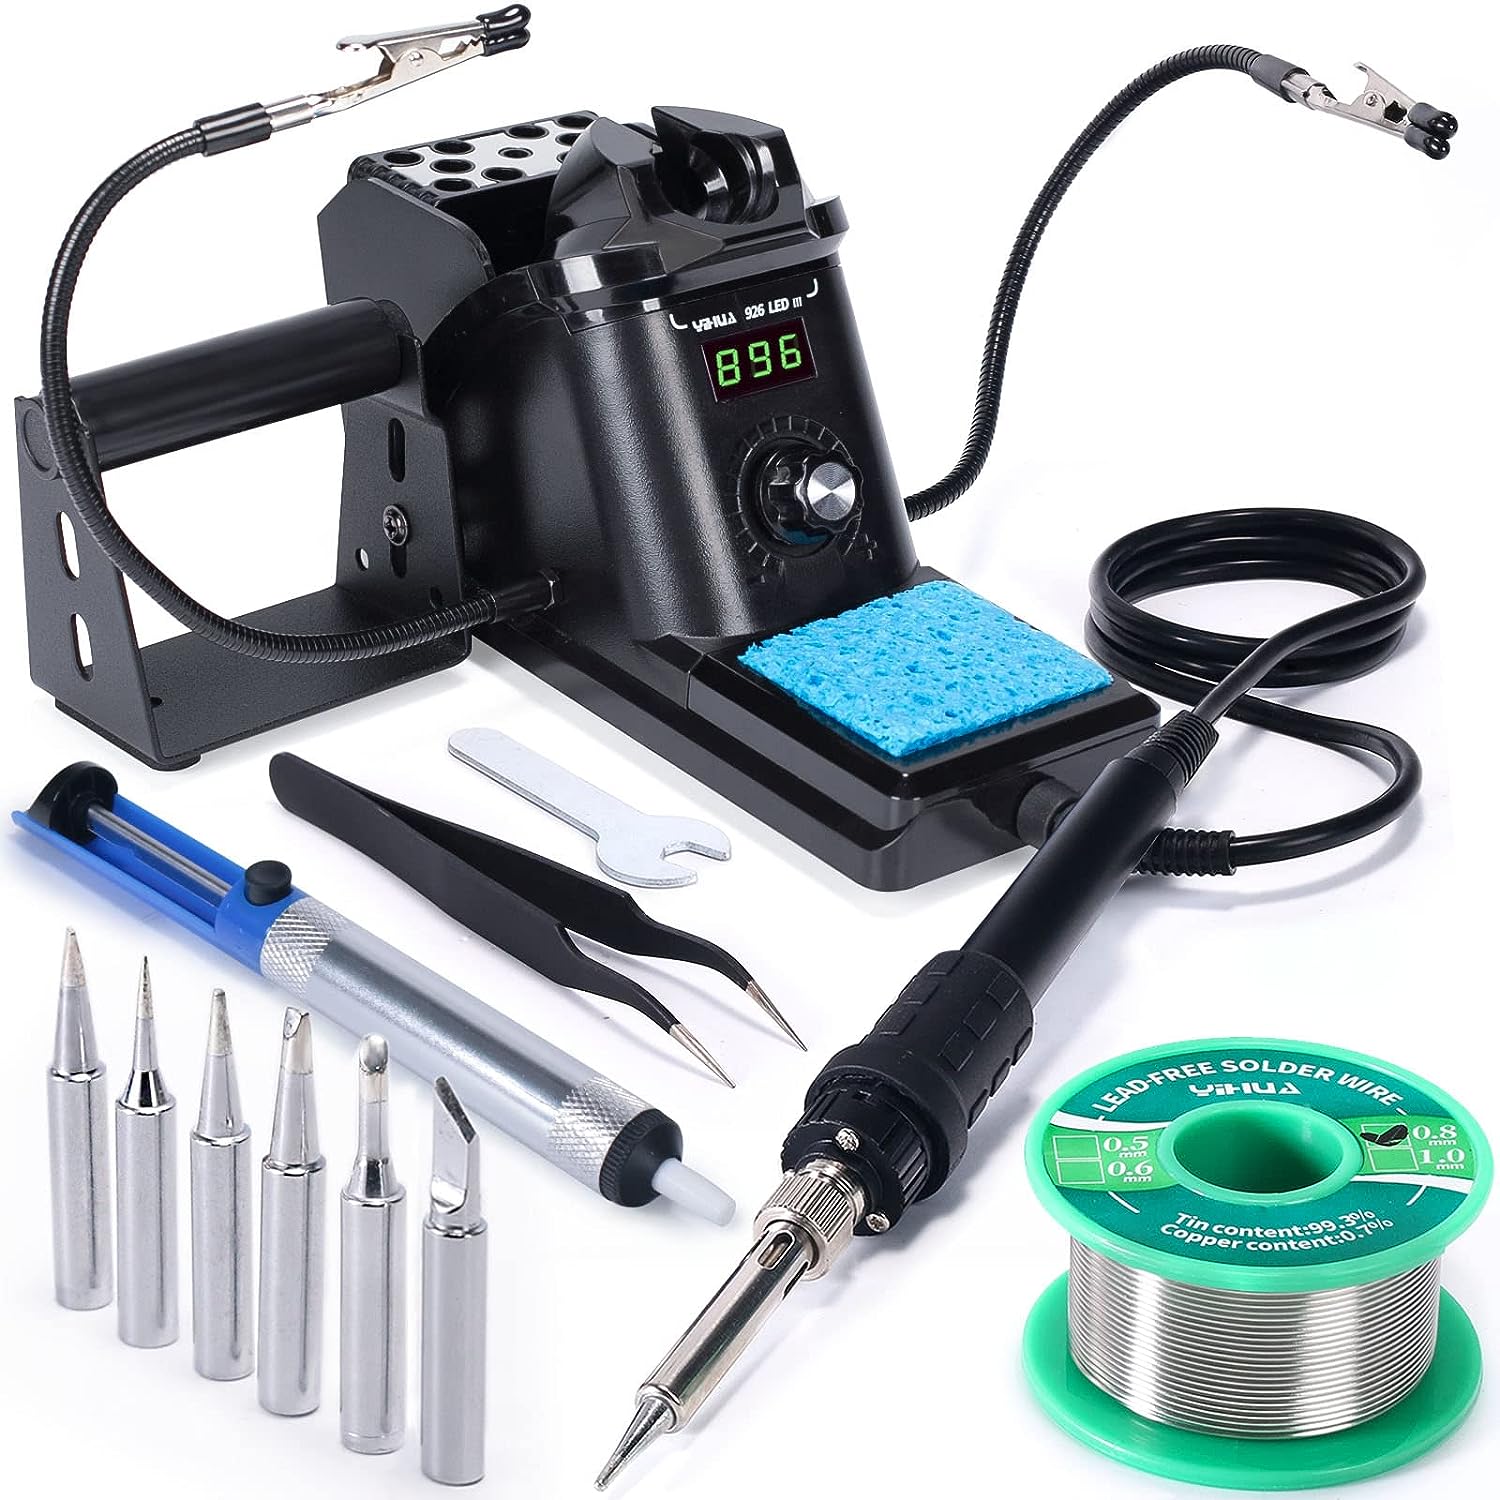 Soldering iron product image with different heads and wire.